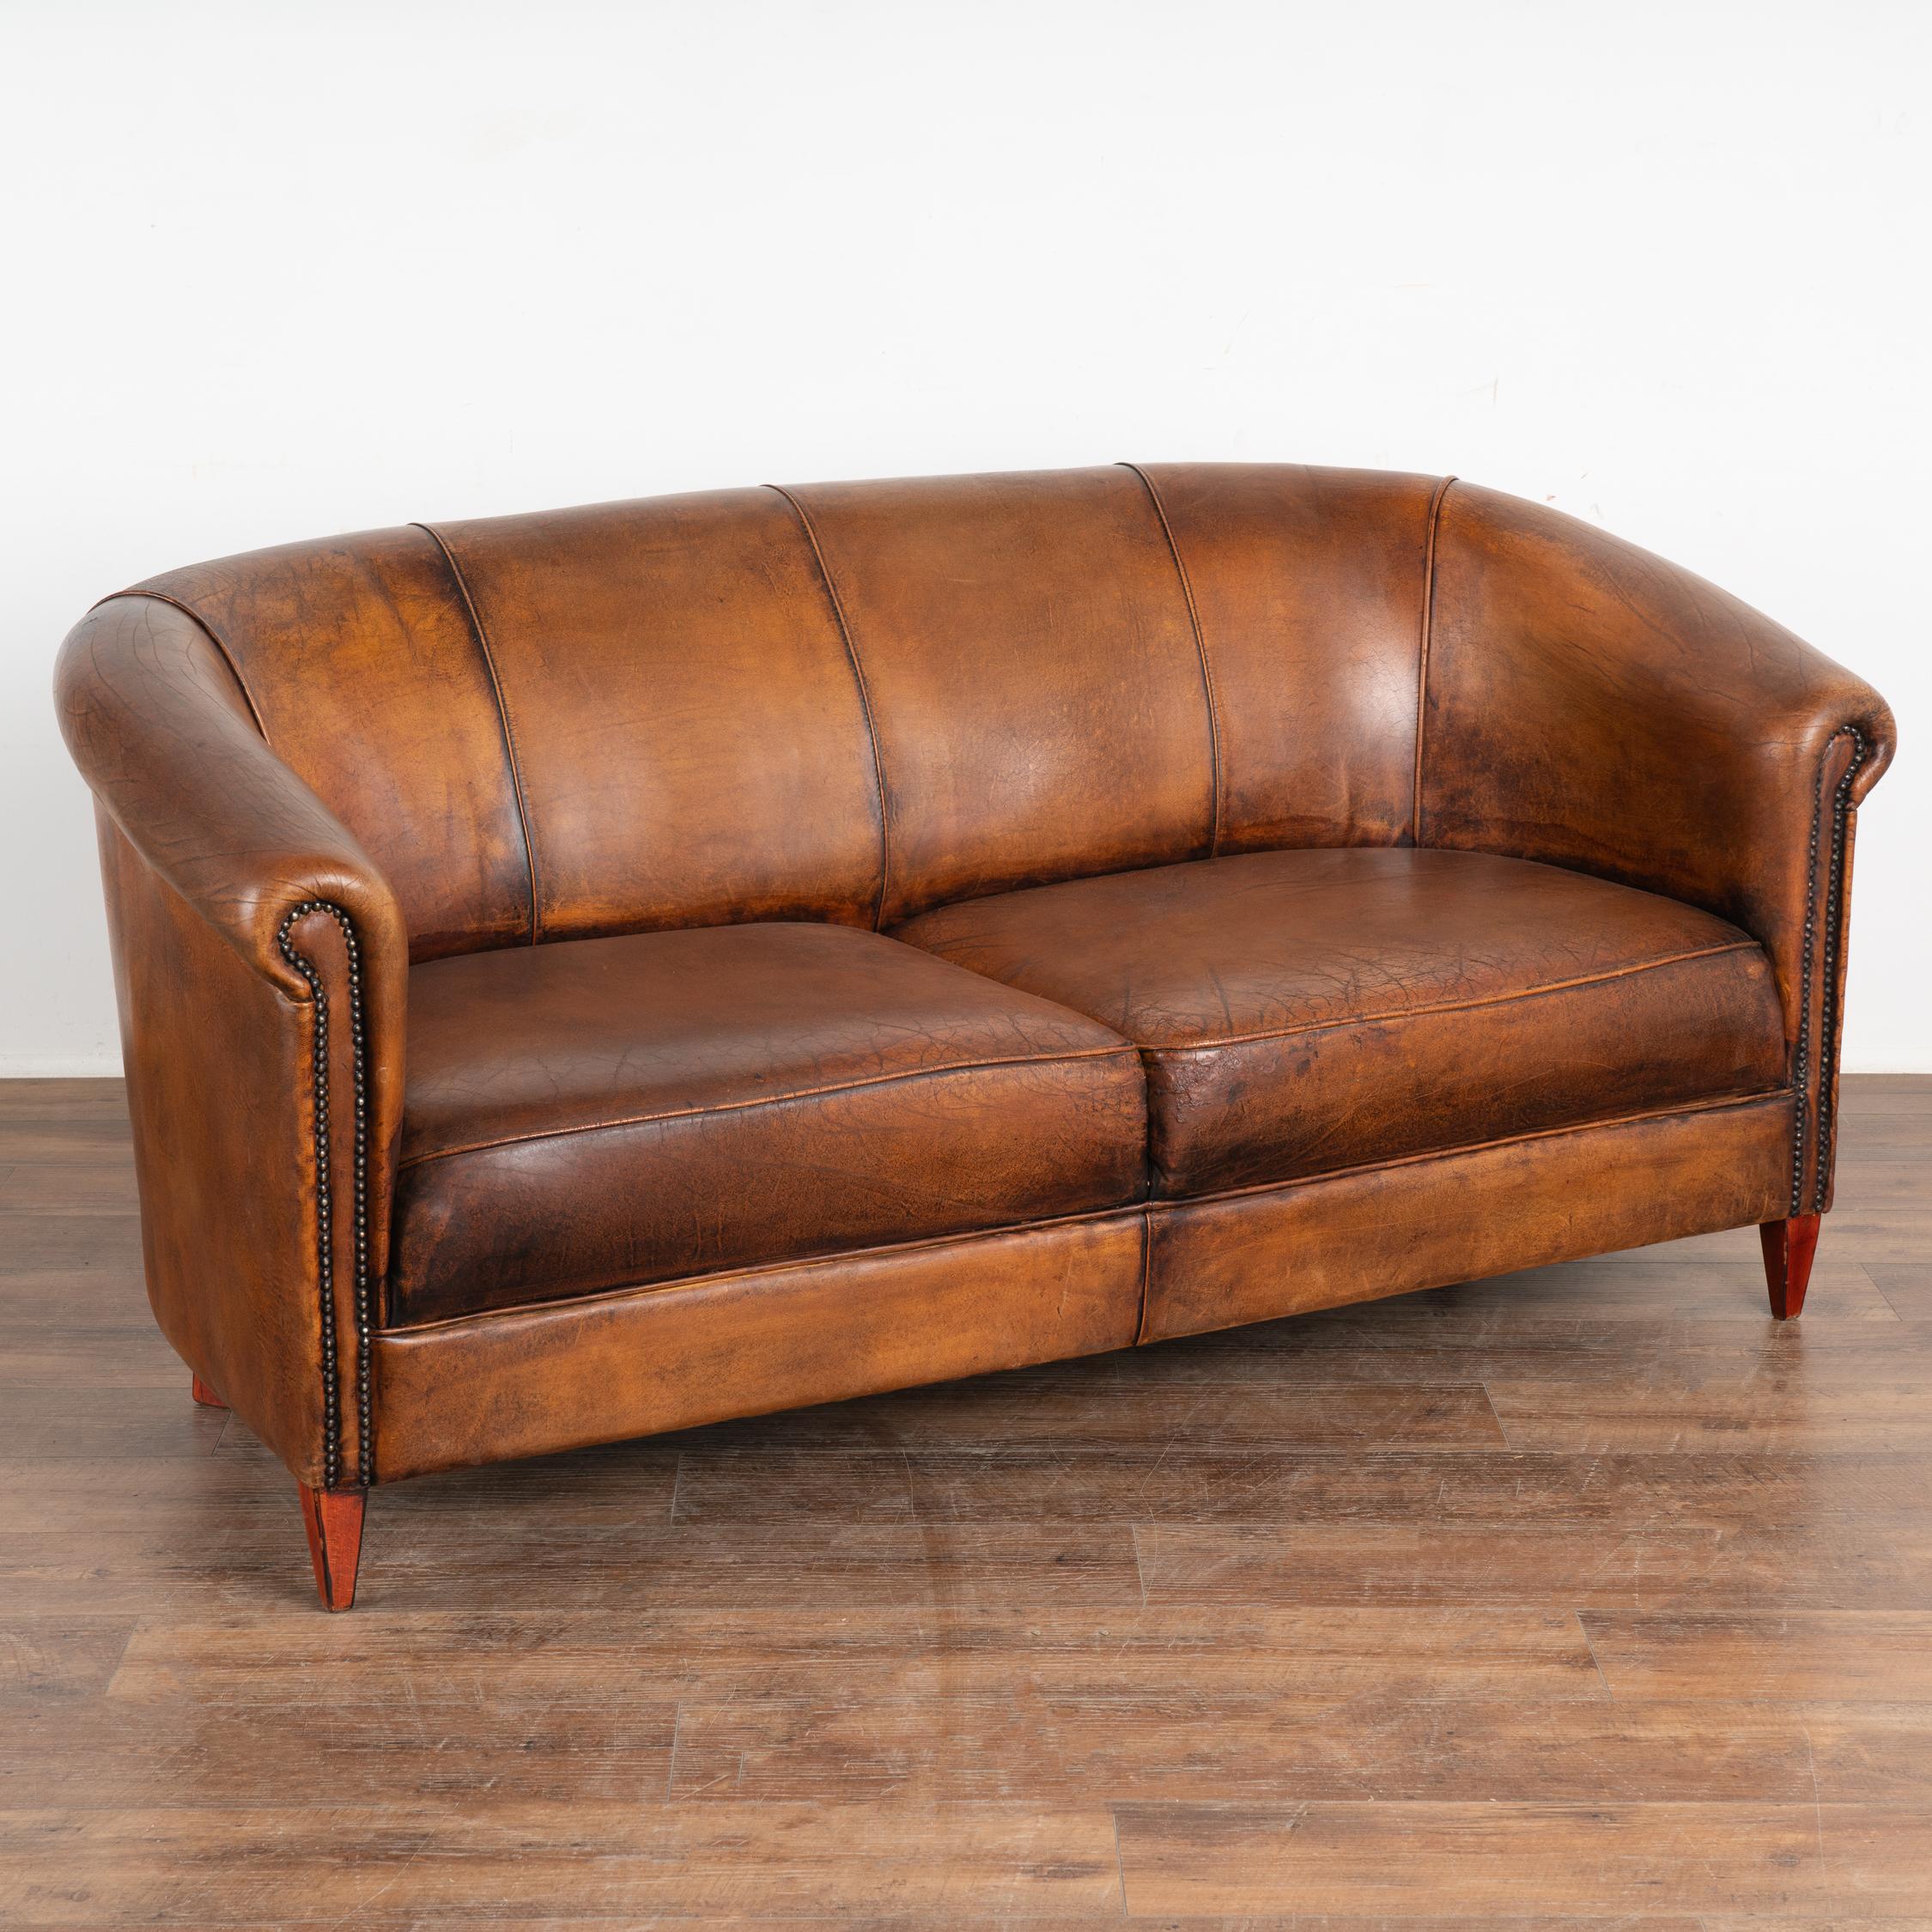 Vintage leather has an appeal all its own, especially when worn and weathered as seen in this handsome two-seat sofa. The aged patina of the brown leather has deepened through generations of use.
The gently rolled arms have traditional nailhead